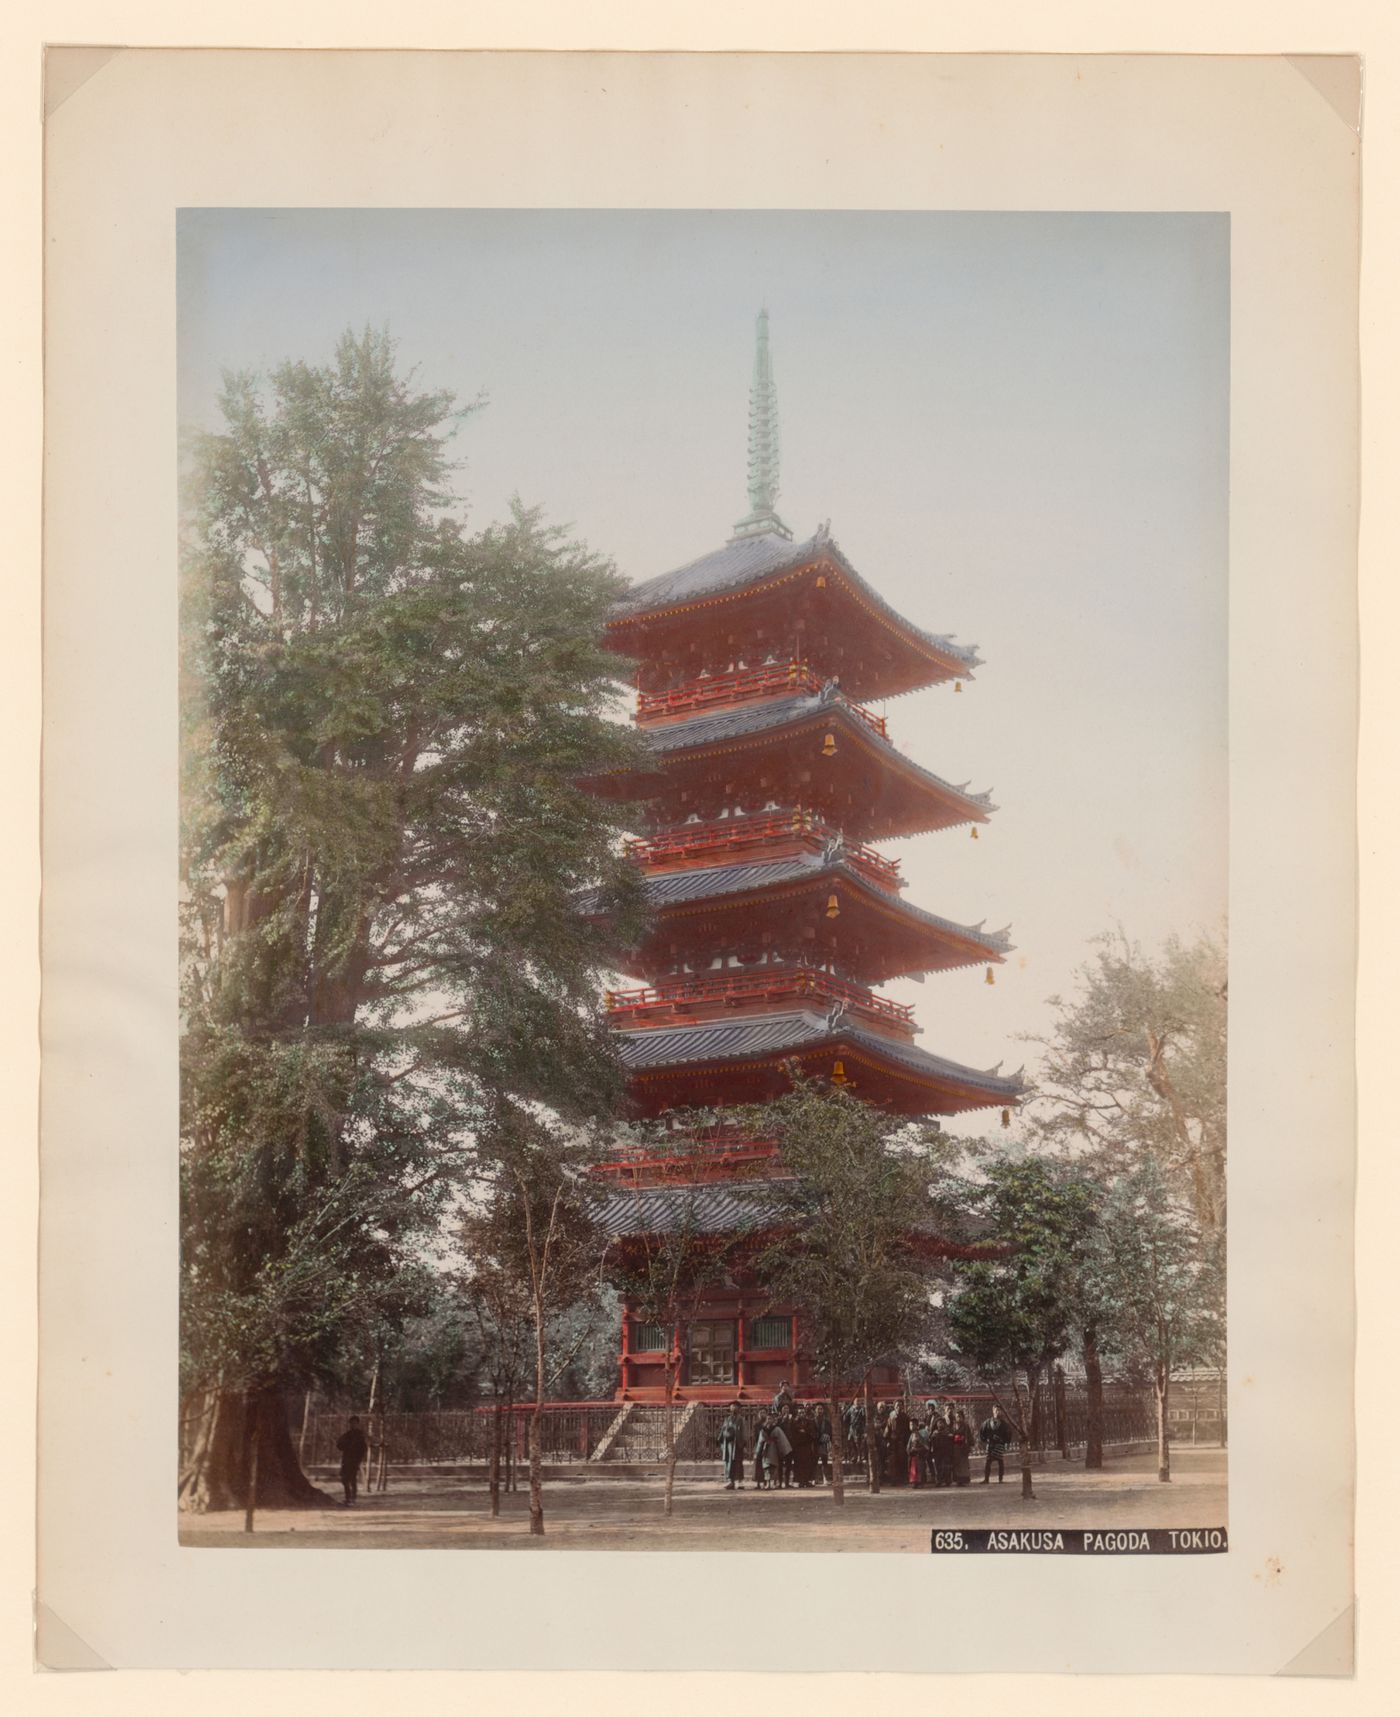 View of the Five-Storied Pagoda, Sensoji Temple complex (also known as Asakusa Kannon Temple), Tokyo, Japan